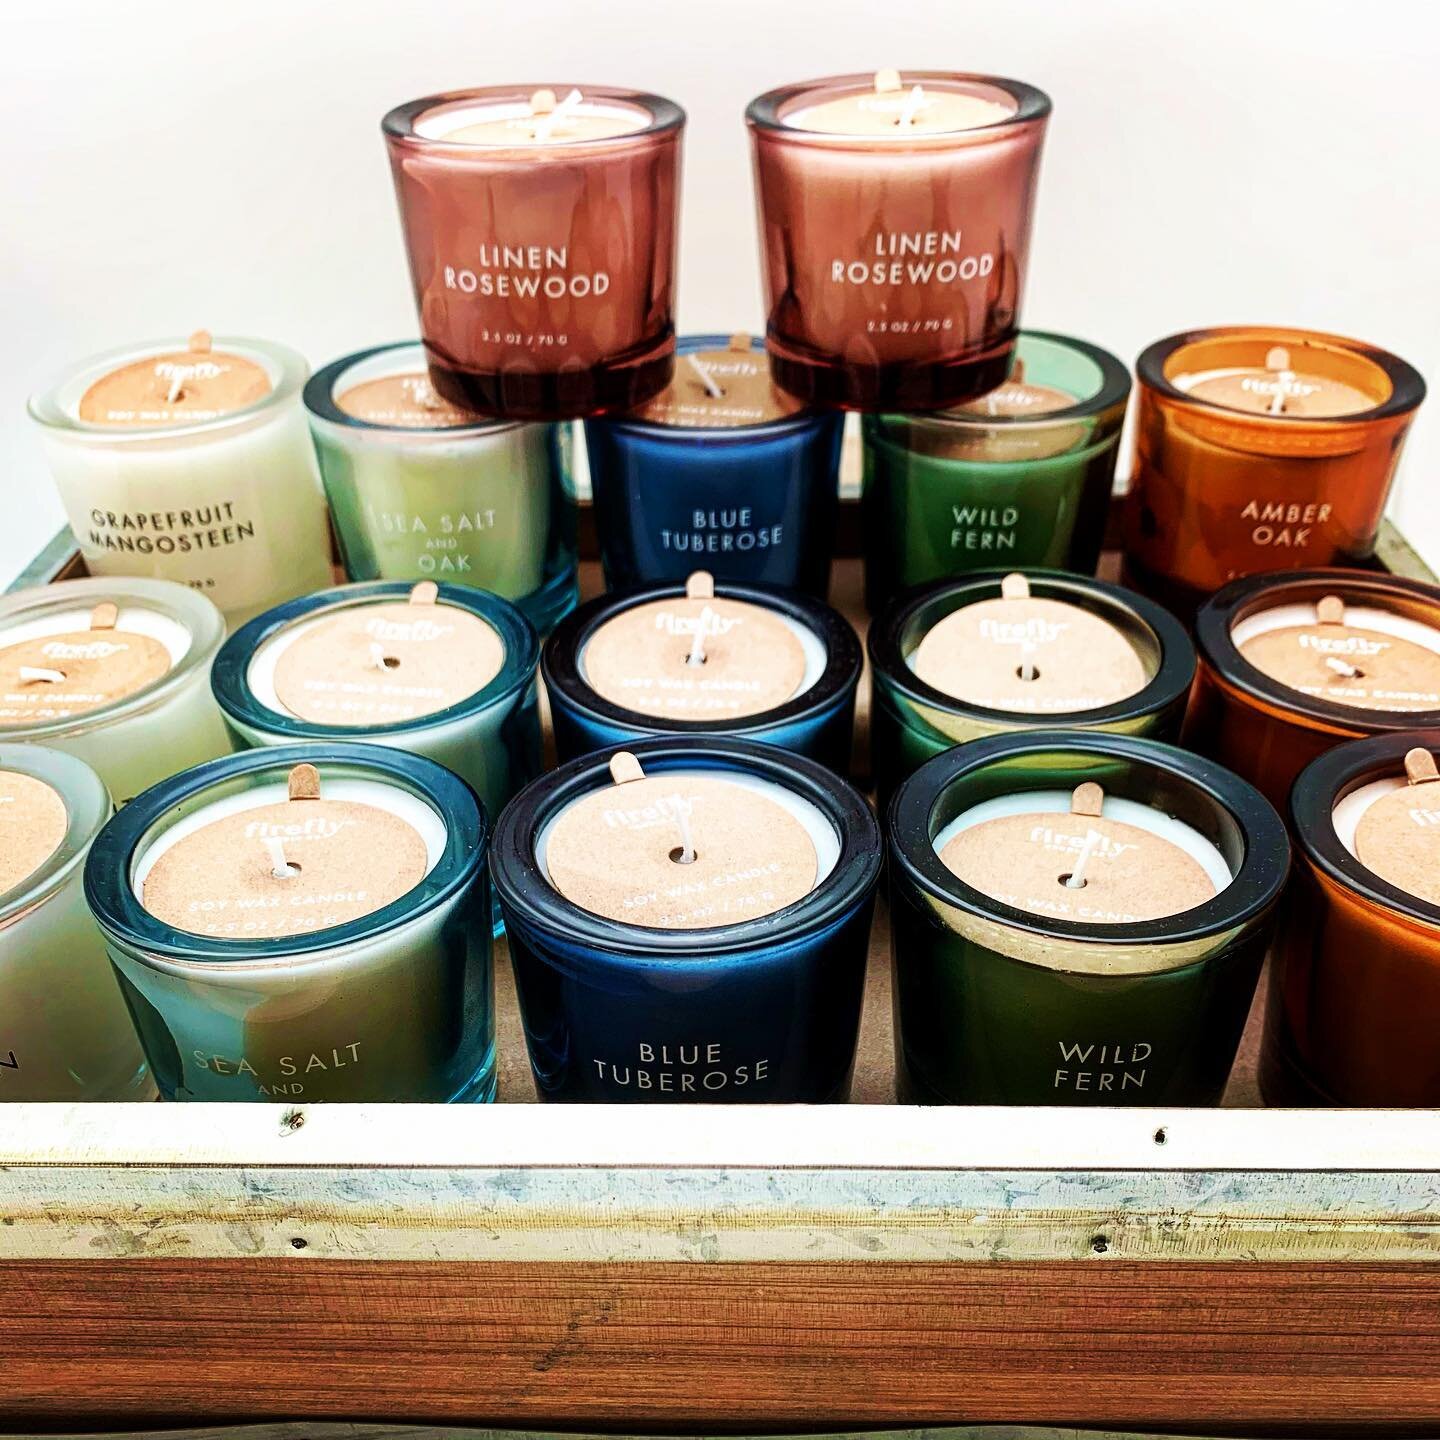 Mix and Match your fragrance!  #candleaddict #candles #grapefruit #seasalt #tuberose #linen #wildfern #amber #scents #votives #smallgifts #mixandmatch #giftguide #greatgifts